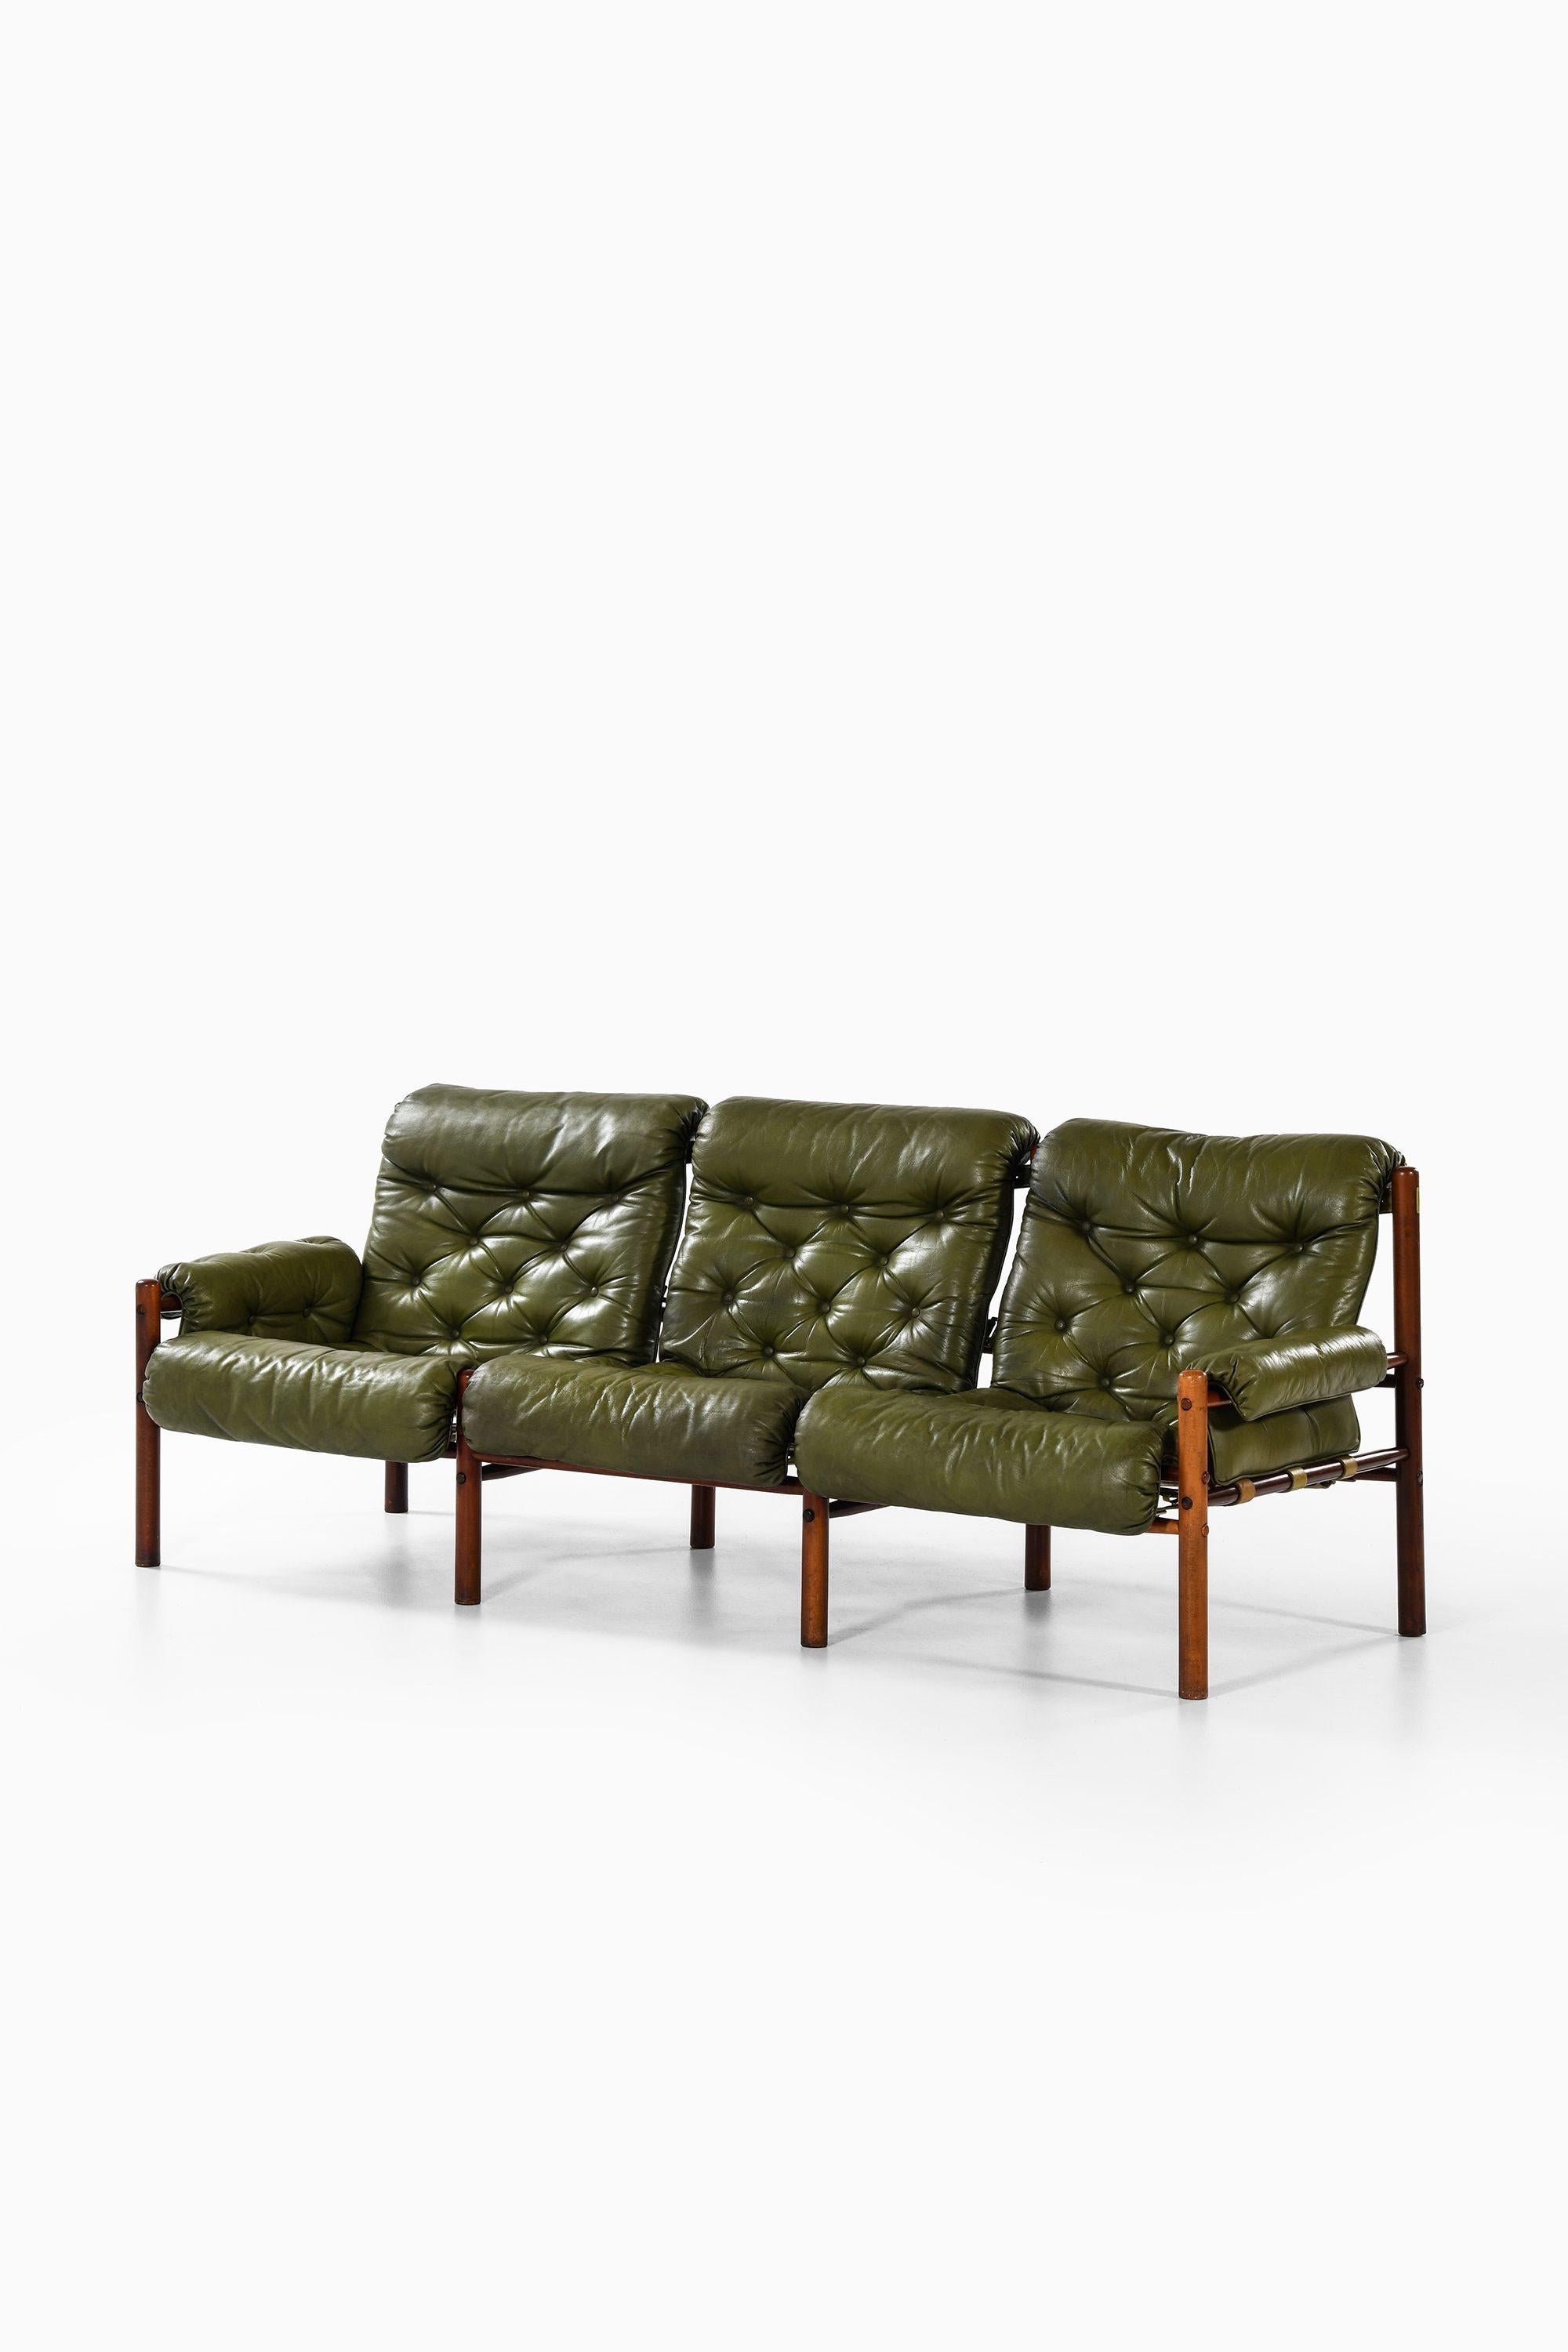 Sofa in Beech and Leather by Arne Norell, 1960s

Additional Information:
Material: Dark stained beech, original green leather and brass
Style: midcentury, Scandinavian
Produced by Arne Norell AB in Aneby, Sweden
Dimensions (W x D x H): 220 x